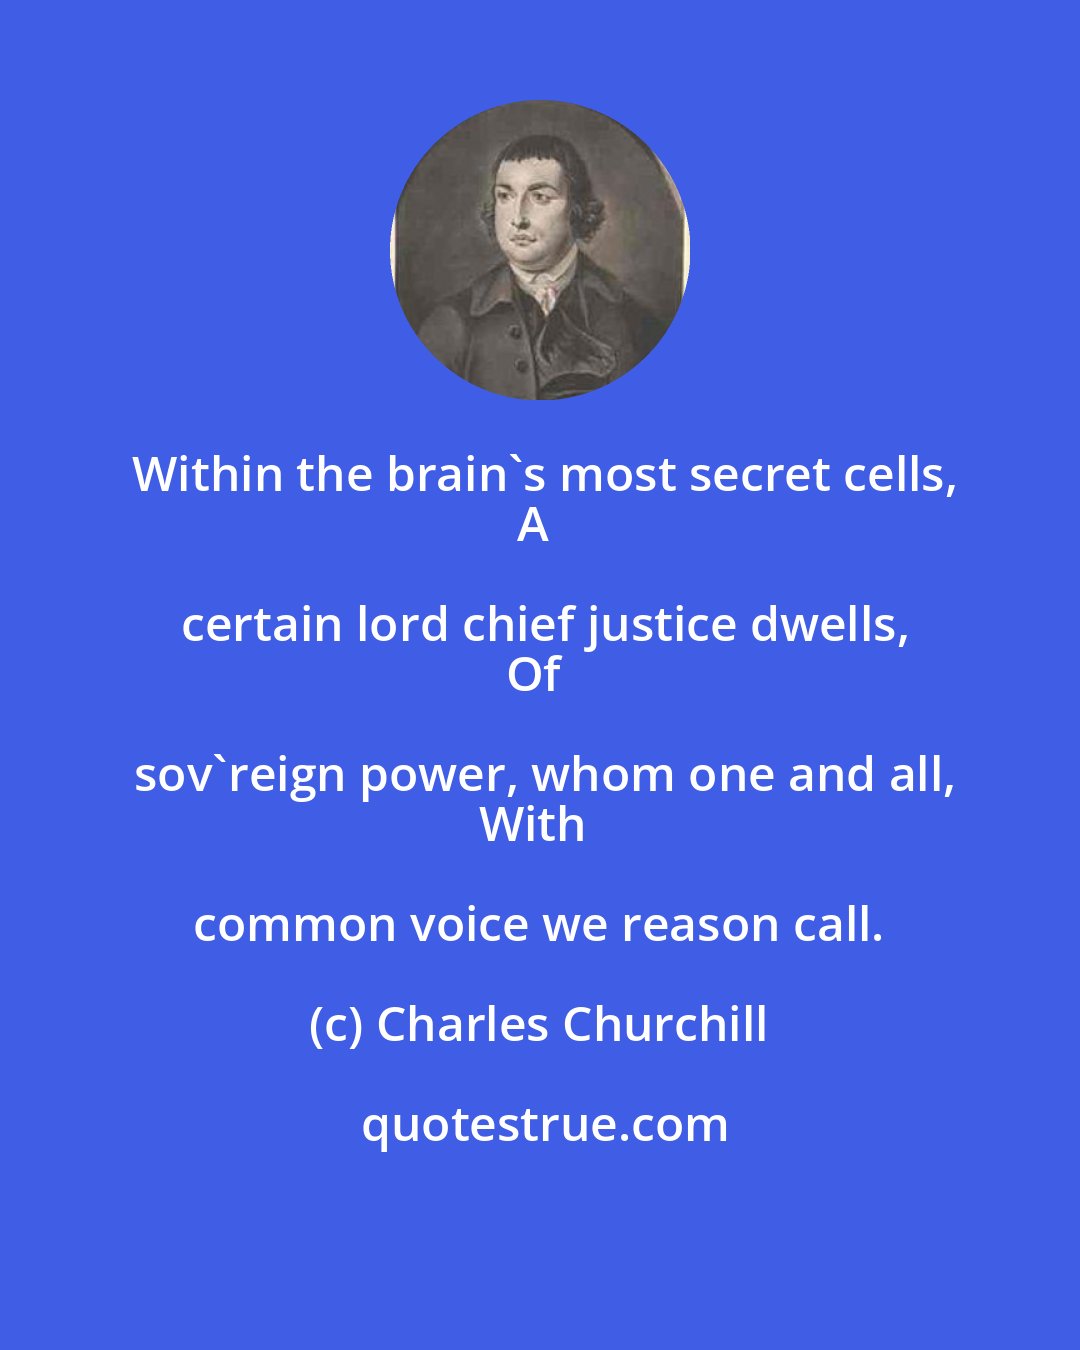 Charles Churchill: Within the brain's most secret cells,
A certain lord chief justice dwells,
Of sov'reign power, whom one and all,
With common voice we reason call.